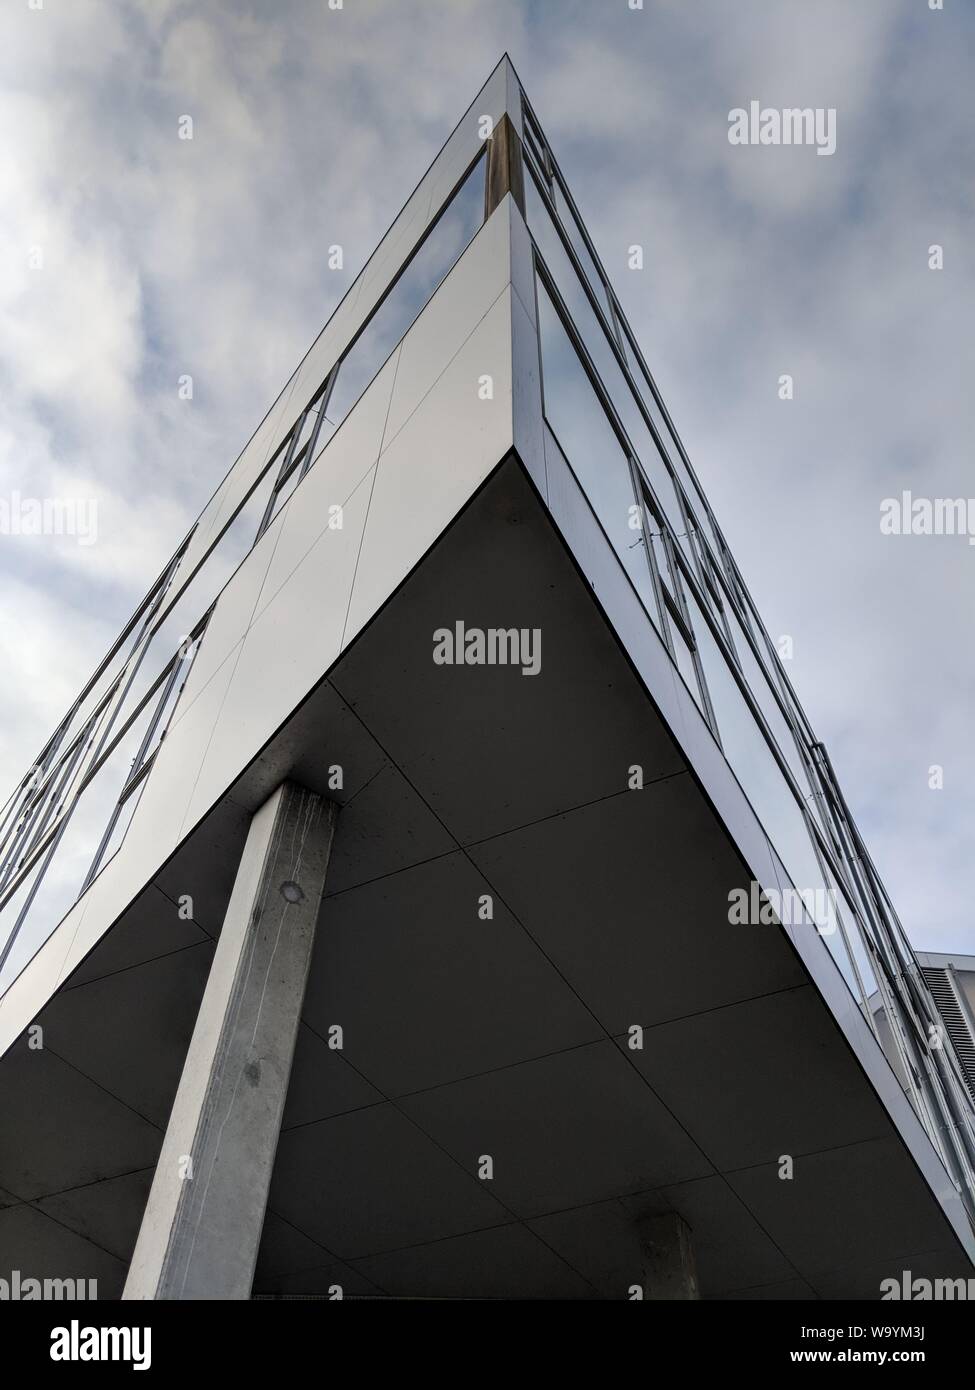 Vertical low angle shot of a high rise triangular building Stock Photo